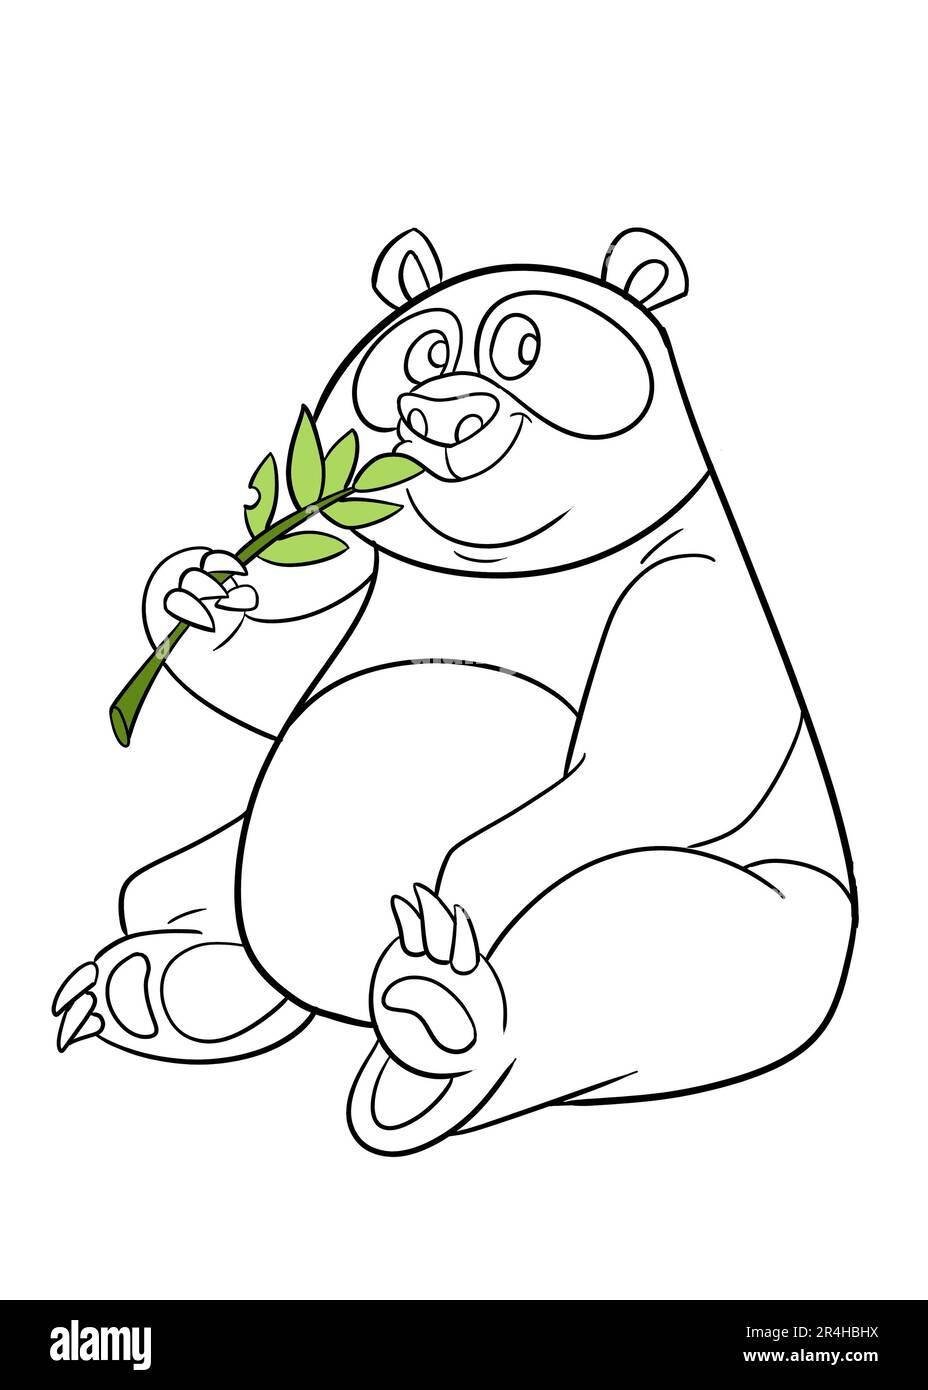 Cute giant panda. Template for a coloring book with funny animals. Coloring template for kids. Stock Photo